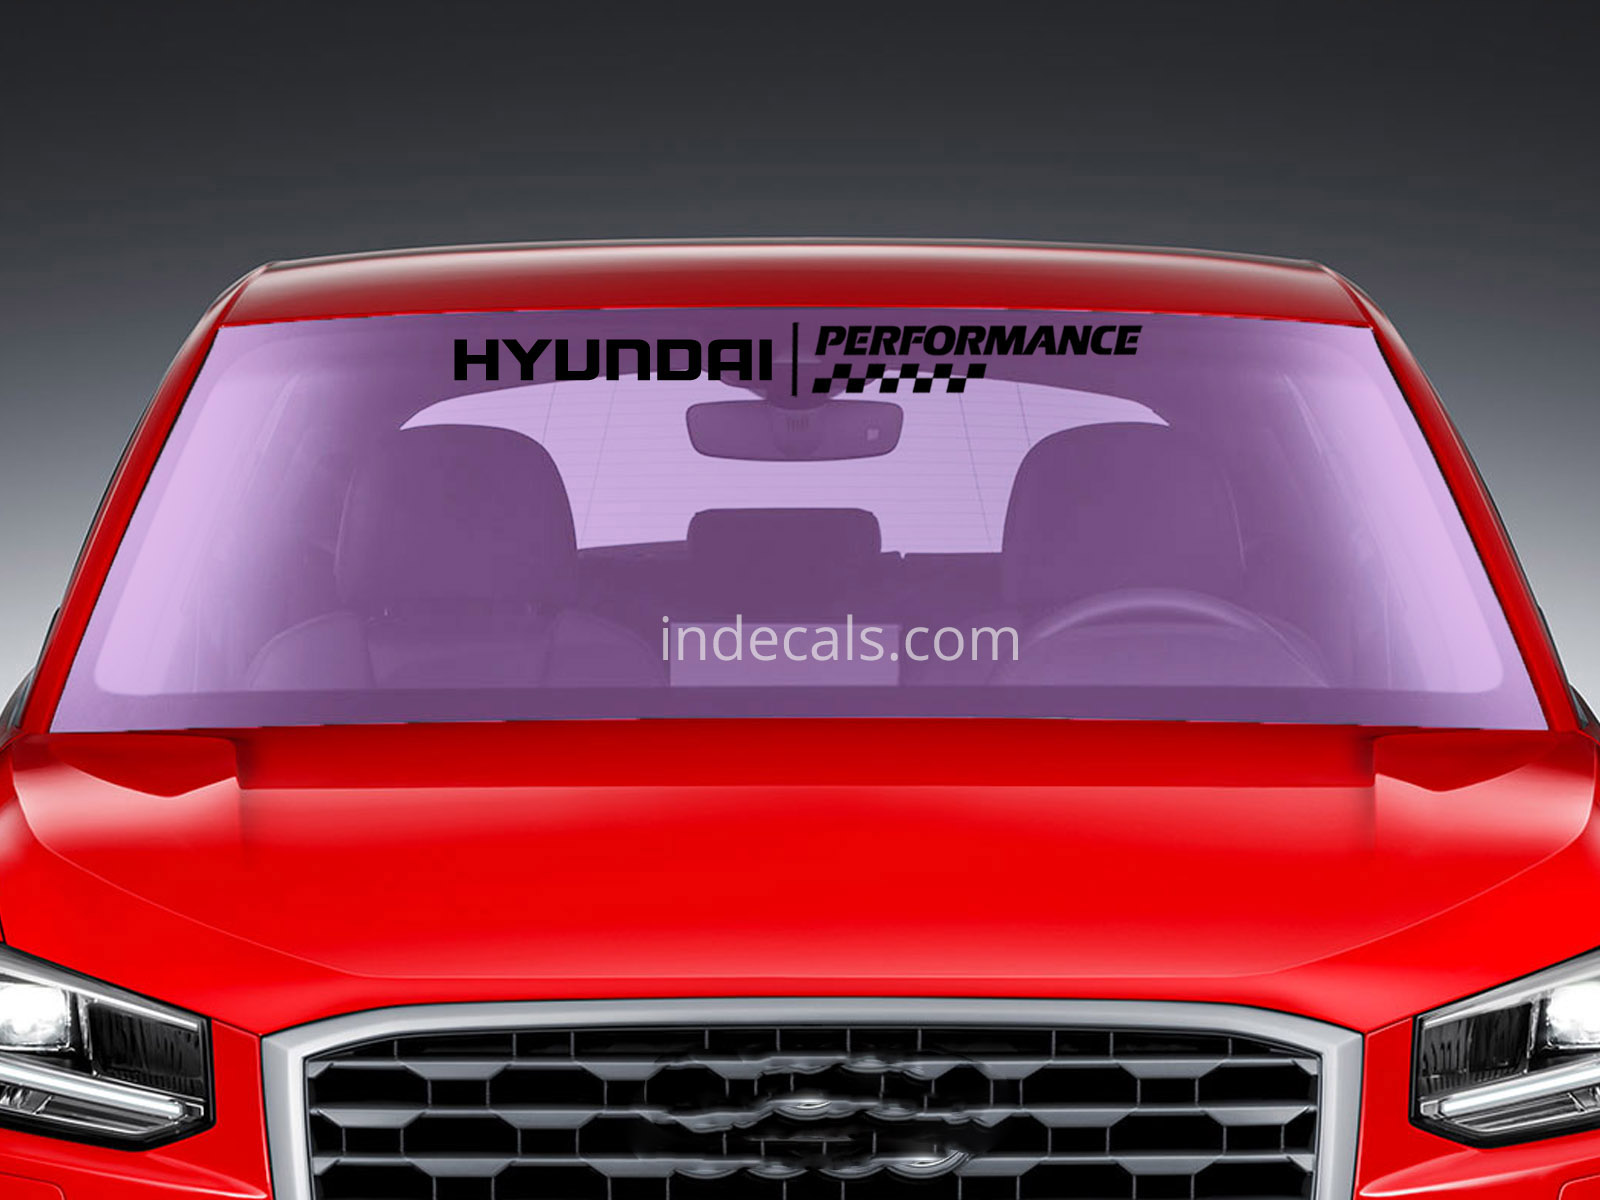 http://indecals.com/img/product/834-1-x-Hyundai-Performance-Sticker-for-Windshield-or-Back-Window--Black.jpg